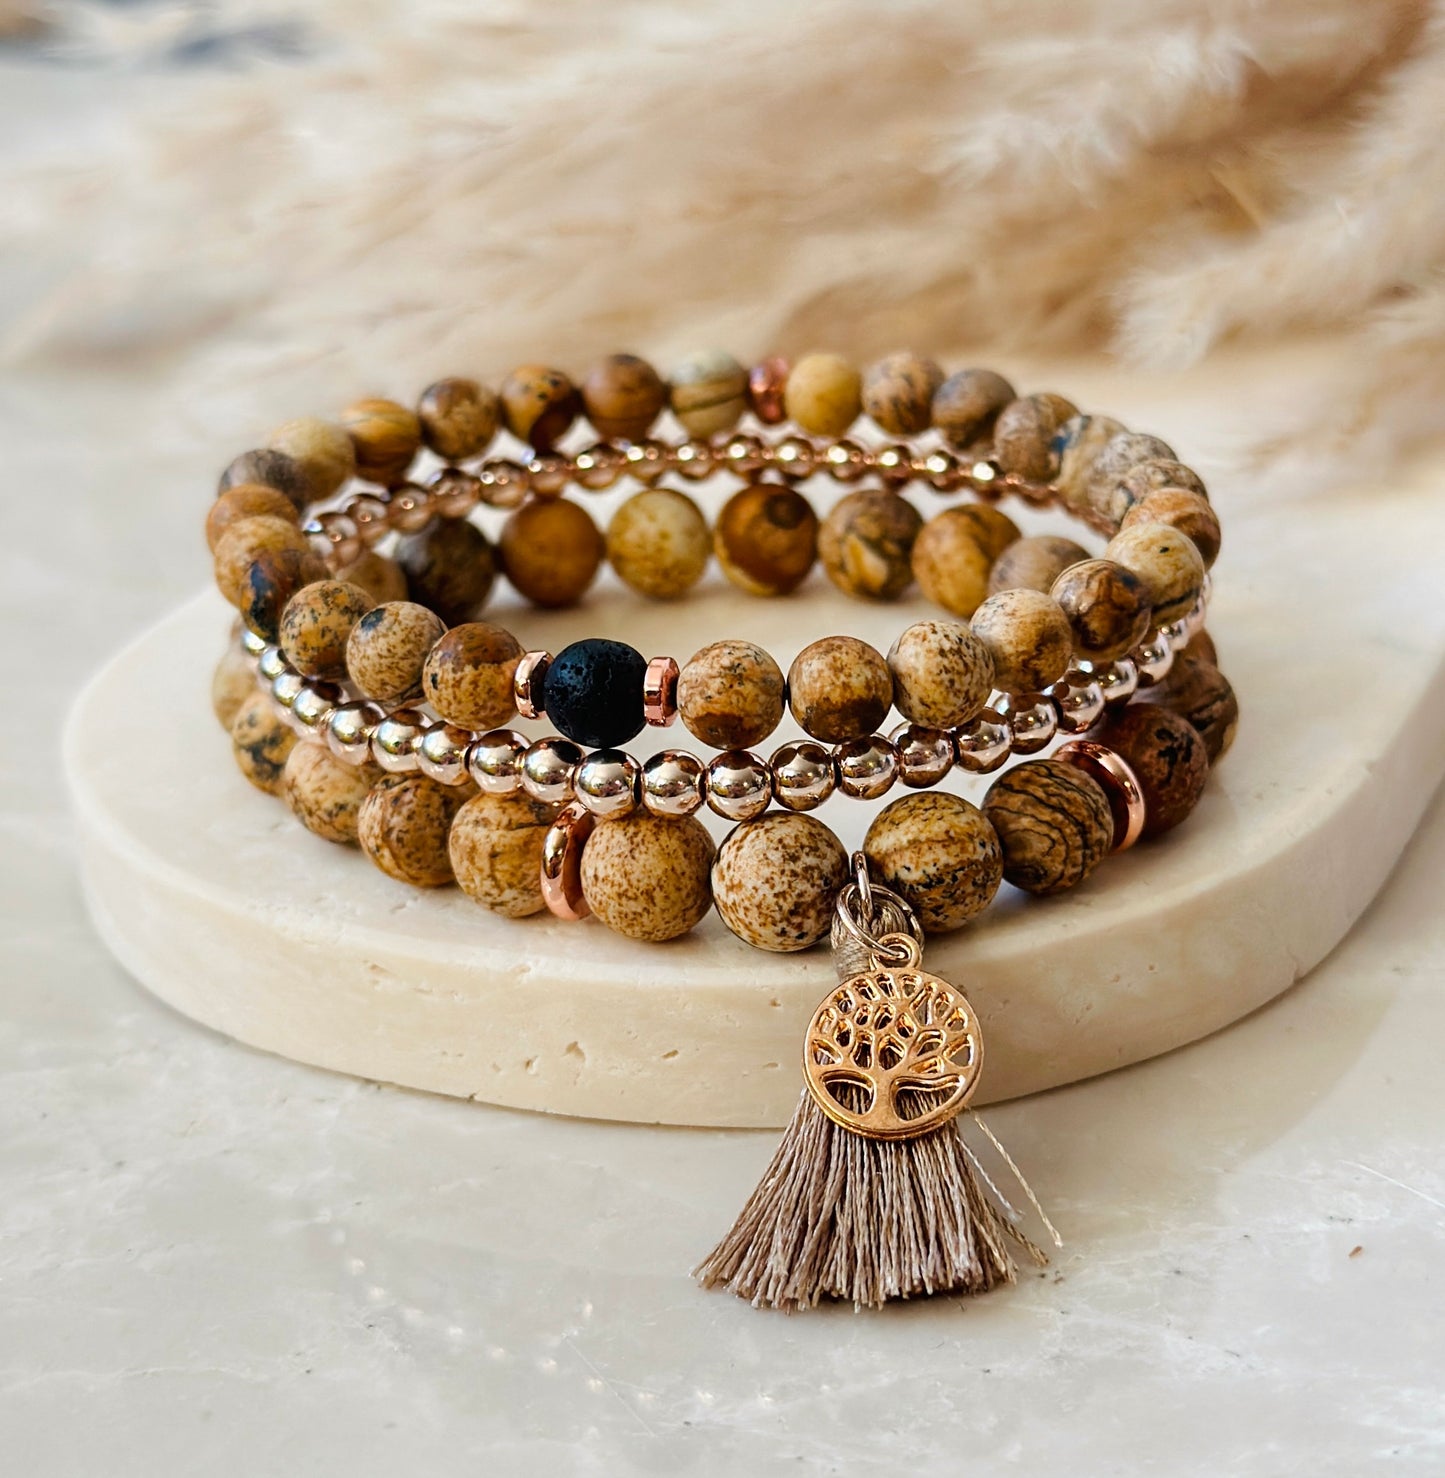 "The Sand Jasper Stack”  a unique gemstone bracelet ensemble meticulously crafted with the soothing and grounding qualities of Sand Jasper, a profound tree of life charm that embodies rich symbolism, and a practical tassel designed to infuse your days with the therapeutic fragrances of essential oils.